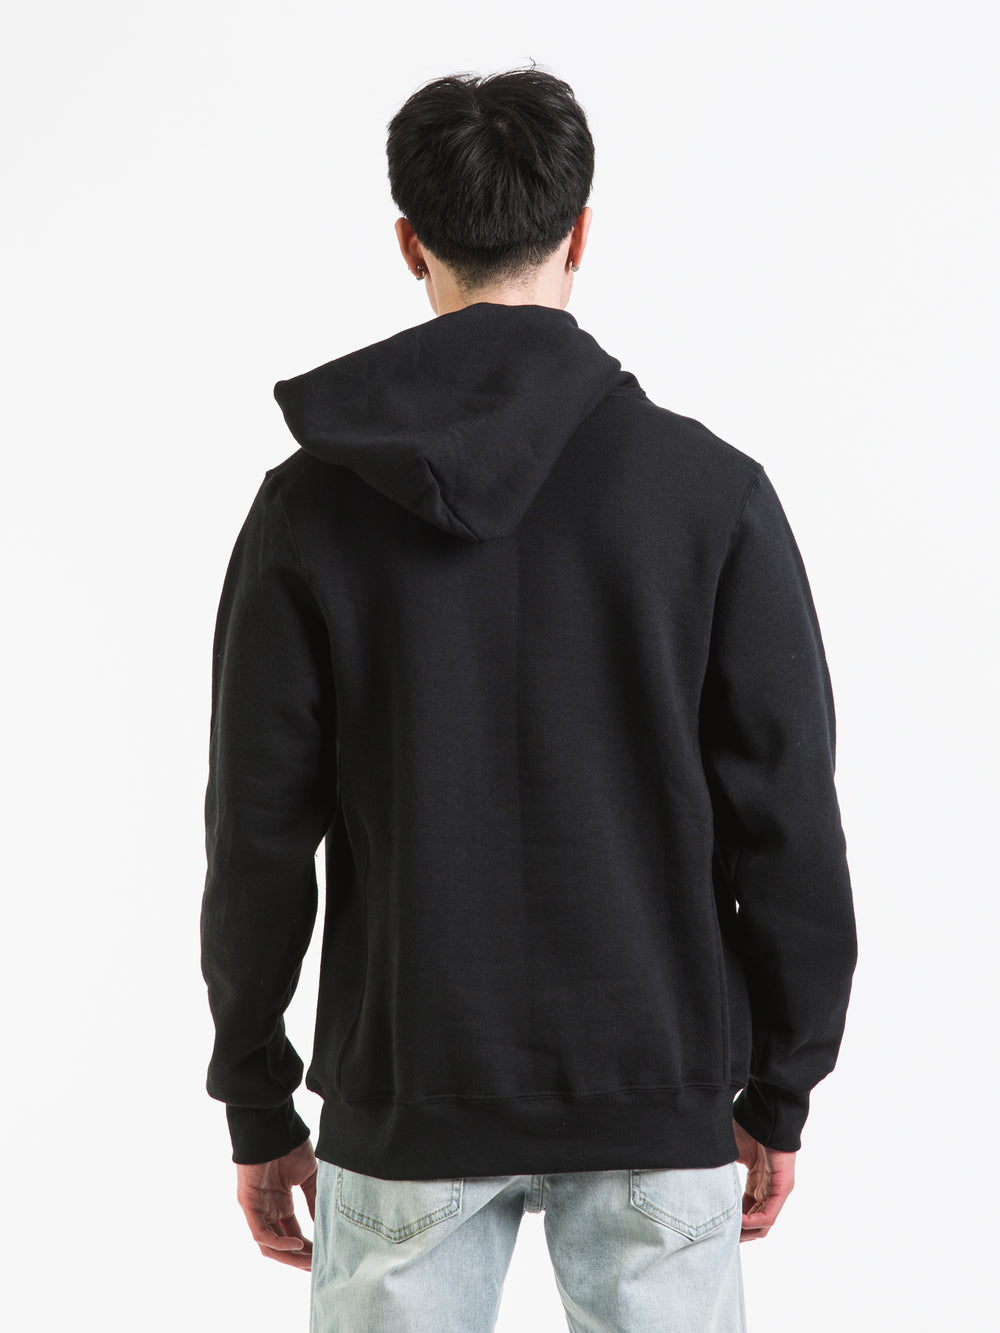 RUSSELL MICHIGAN TONAL PULLOVER HODDIE - DÉSTOCKAGE